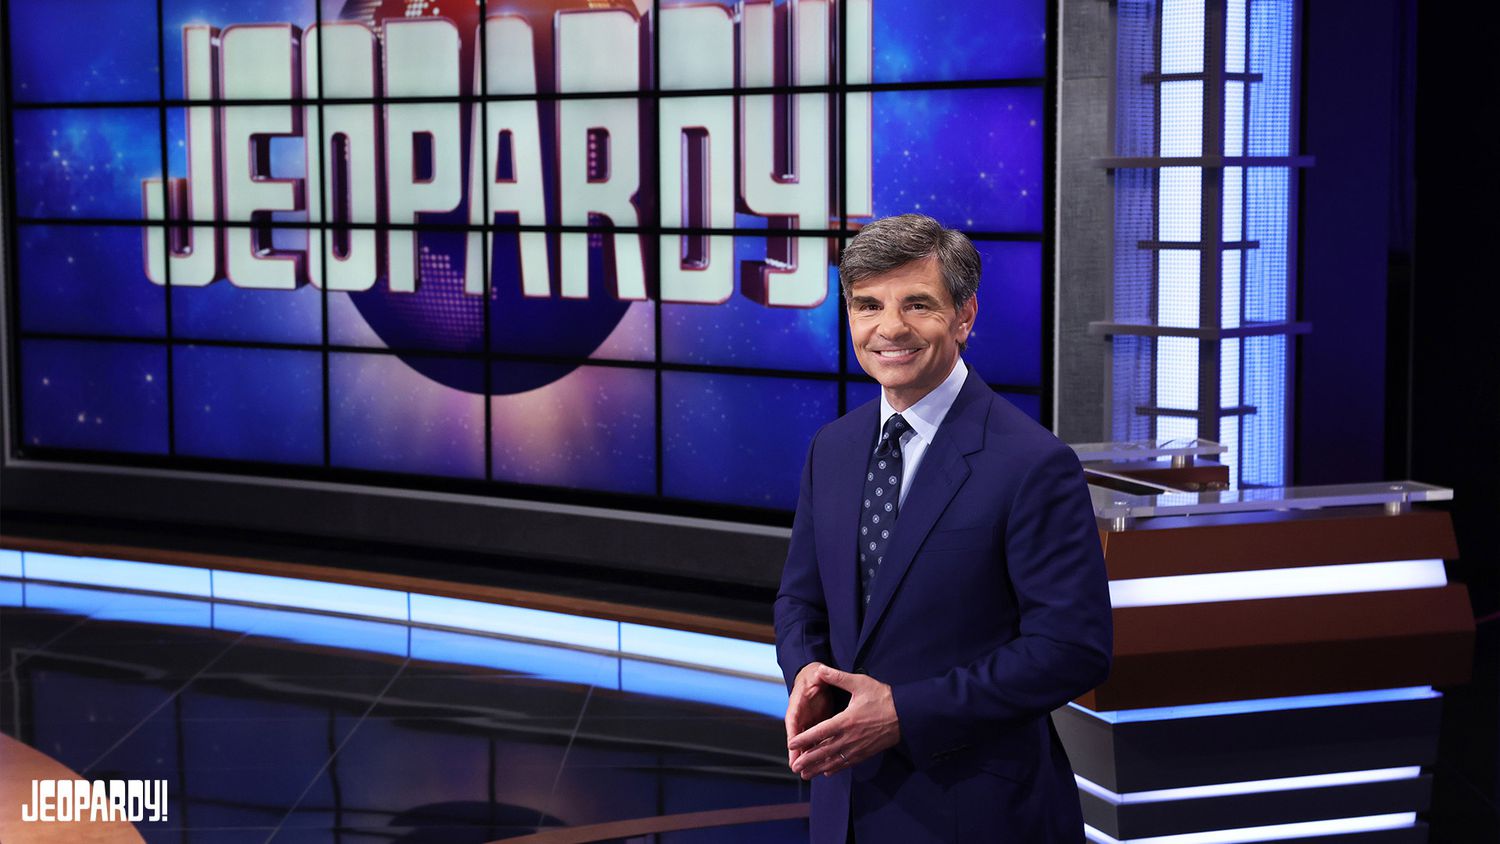 George Stephanopoulos: 'Harder Than It Looks'